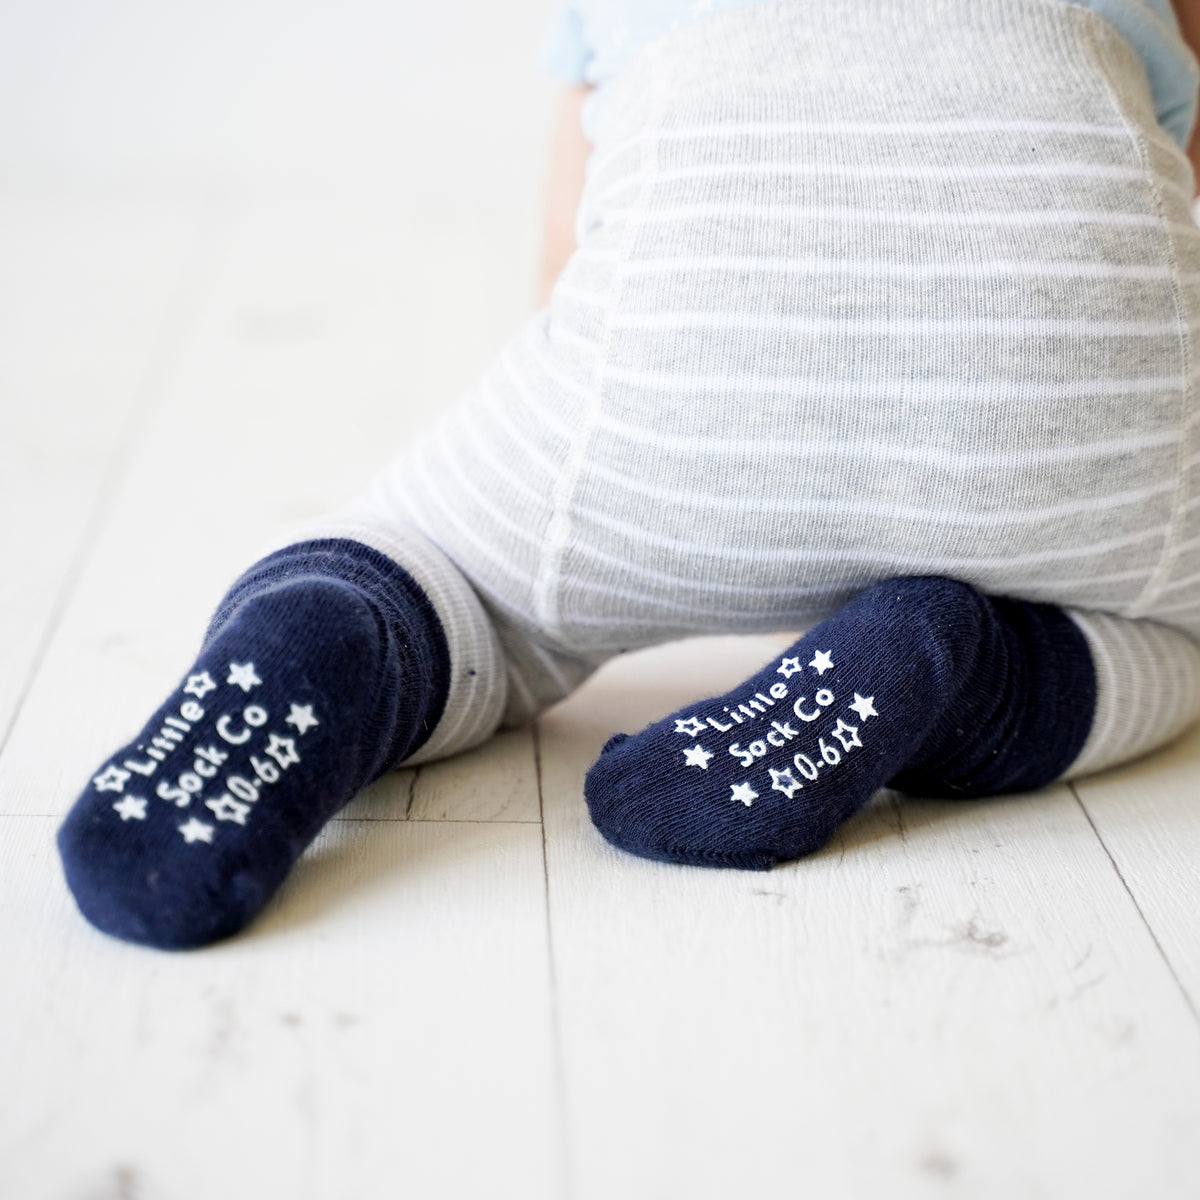 Talipes (clubfoot) Boots and Bar Socks - Non-Slip Stay on Baby and Toddler Socks - 3 Pack in Navy Wide Stripe & Navy